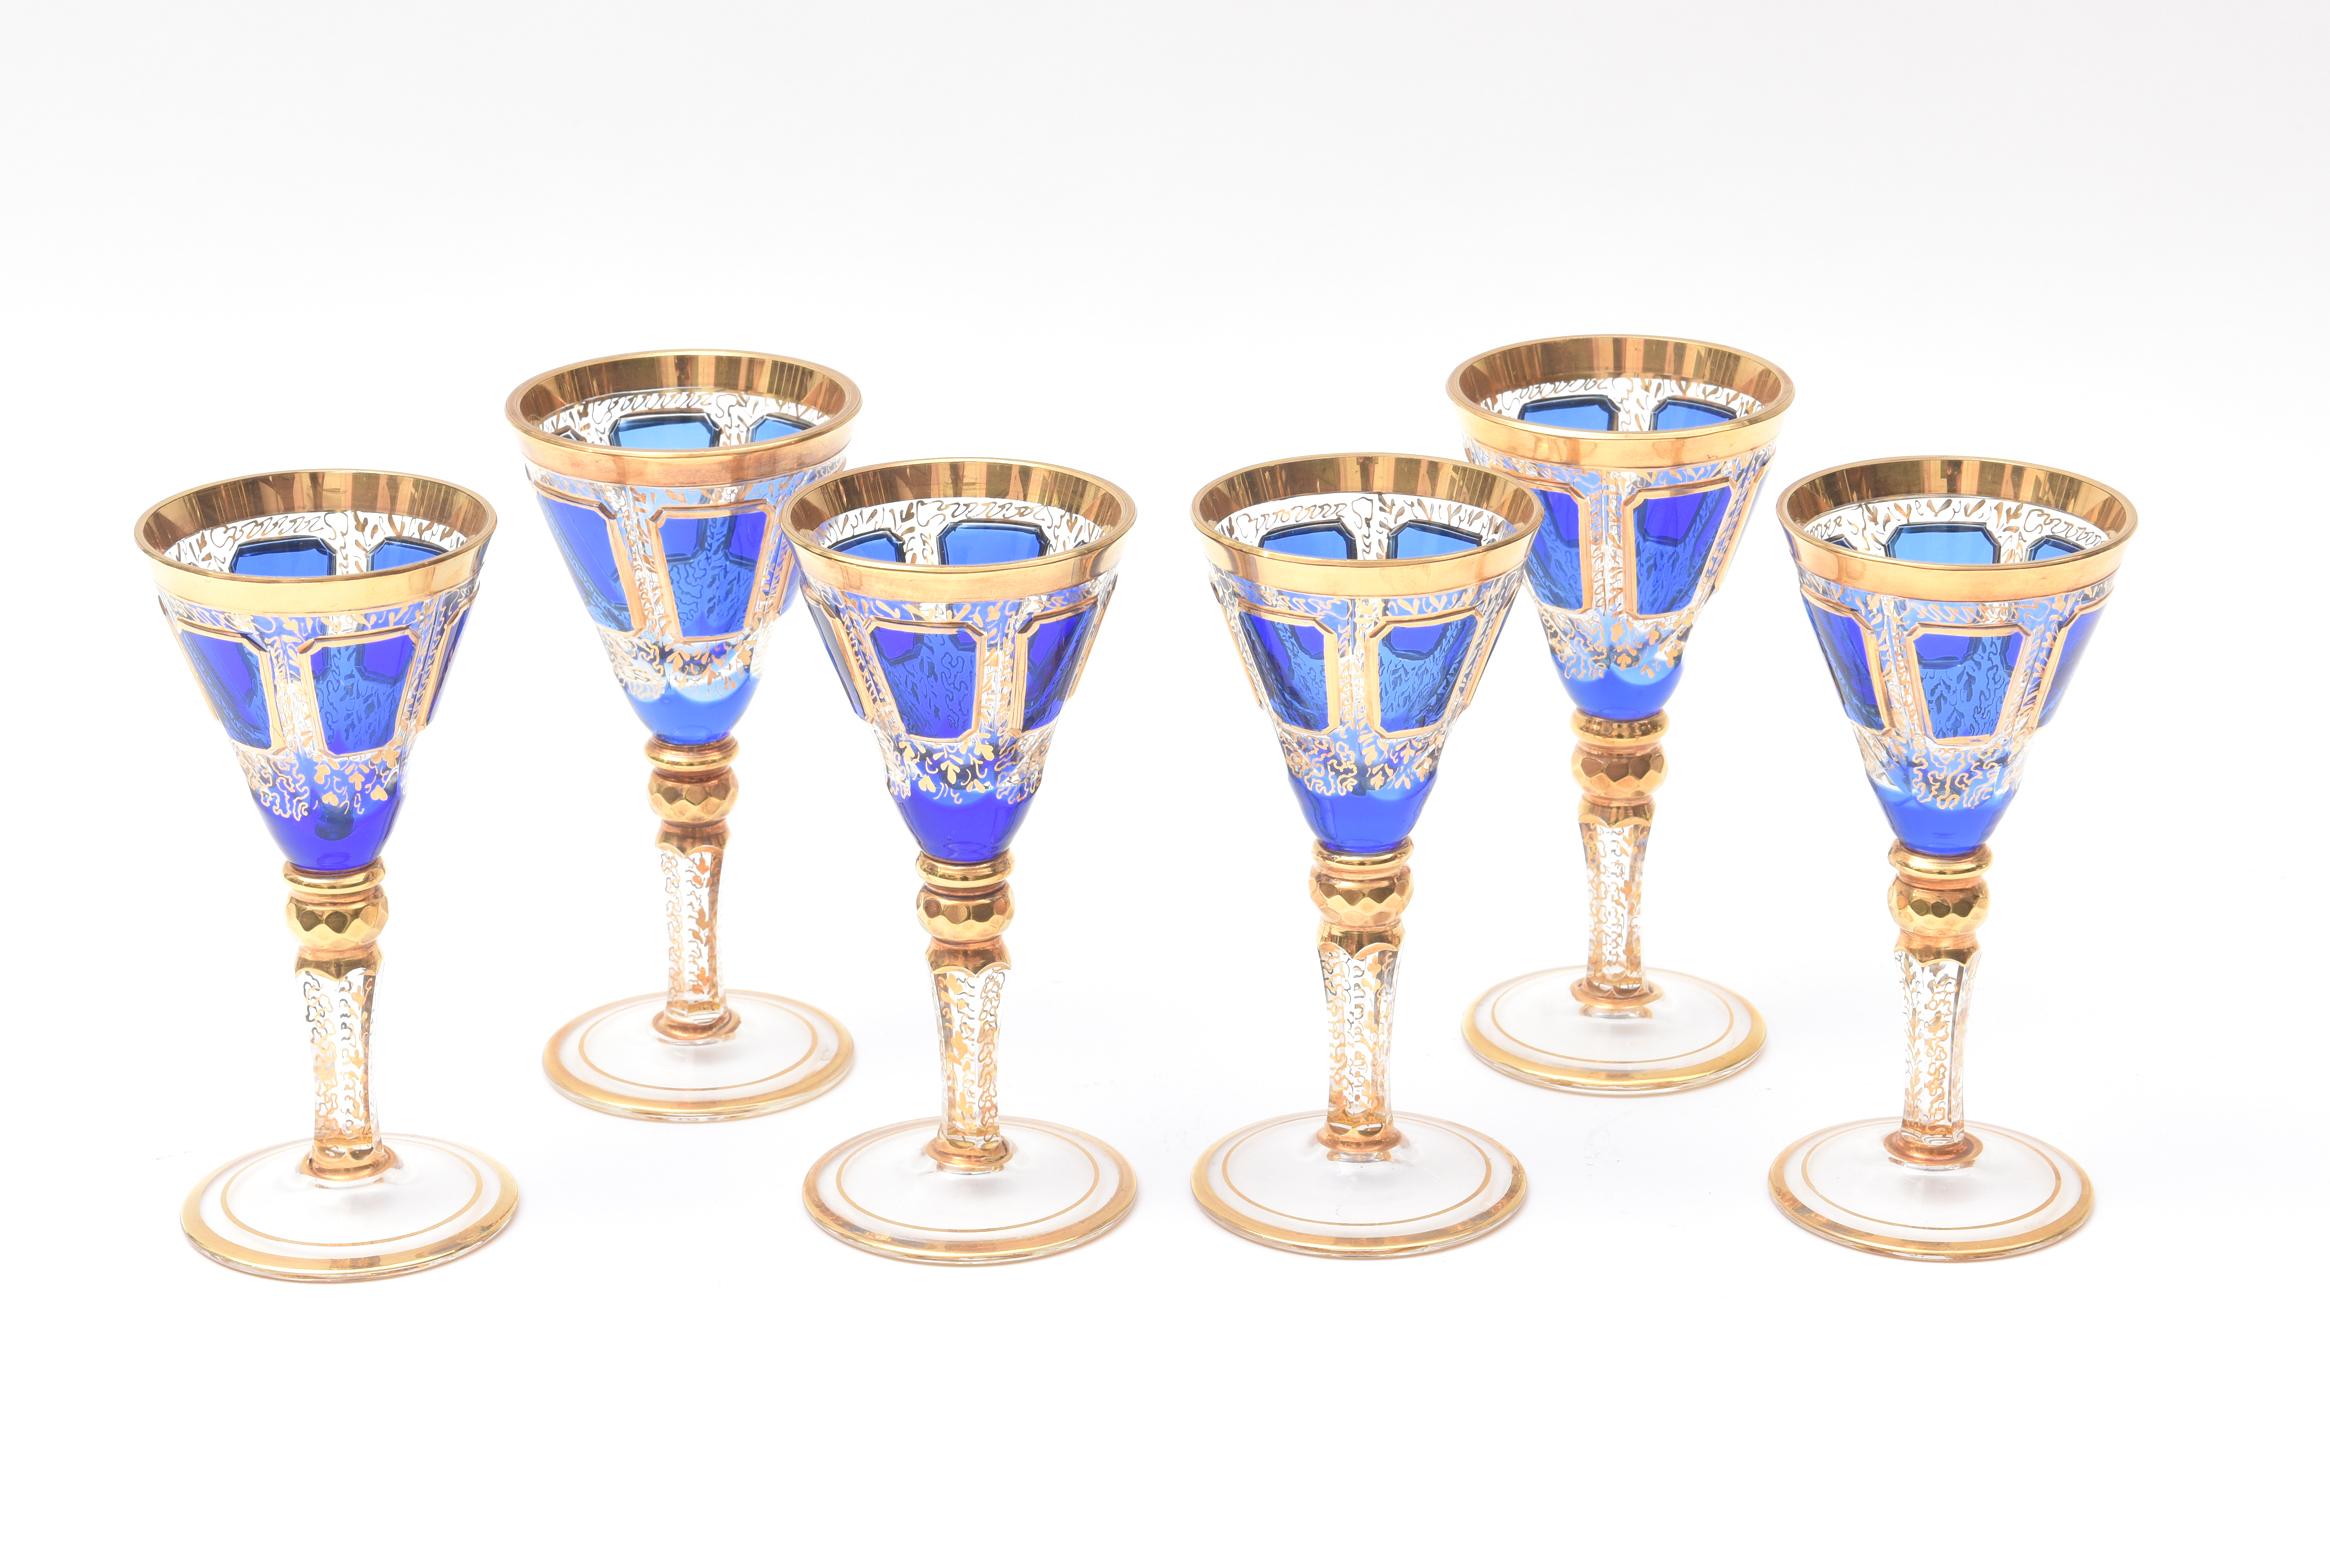 A handsome and Classic set of last quarter 19th century pieces from Moser, The Glass of Kings. These delightful after dinner cordials feature cabochon jewel style decoration and hand painted gilt in an all-over scroll pattern. In wonderful antique